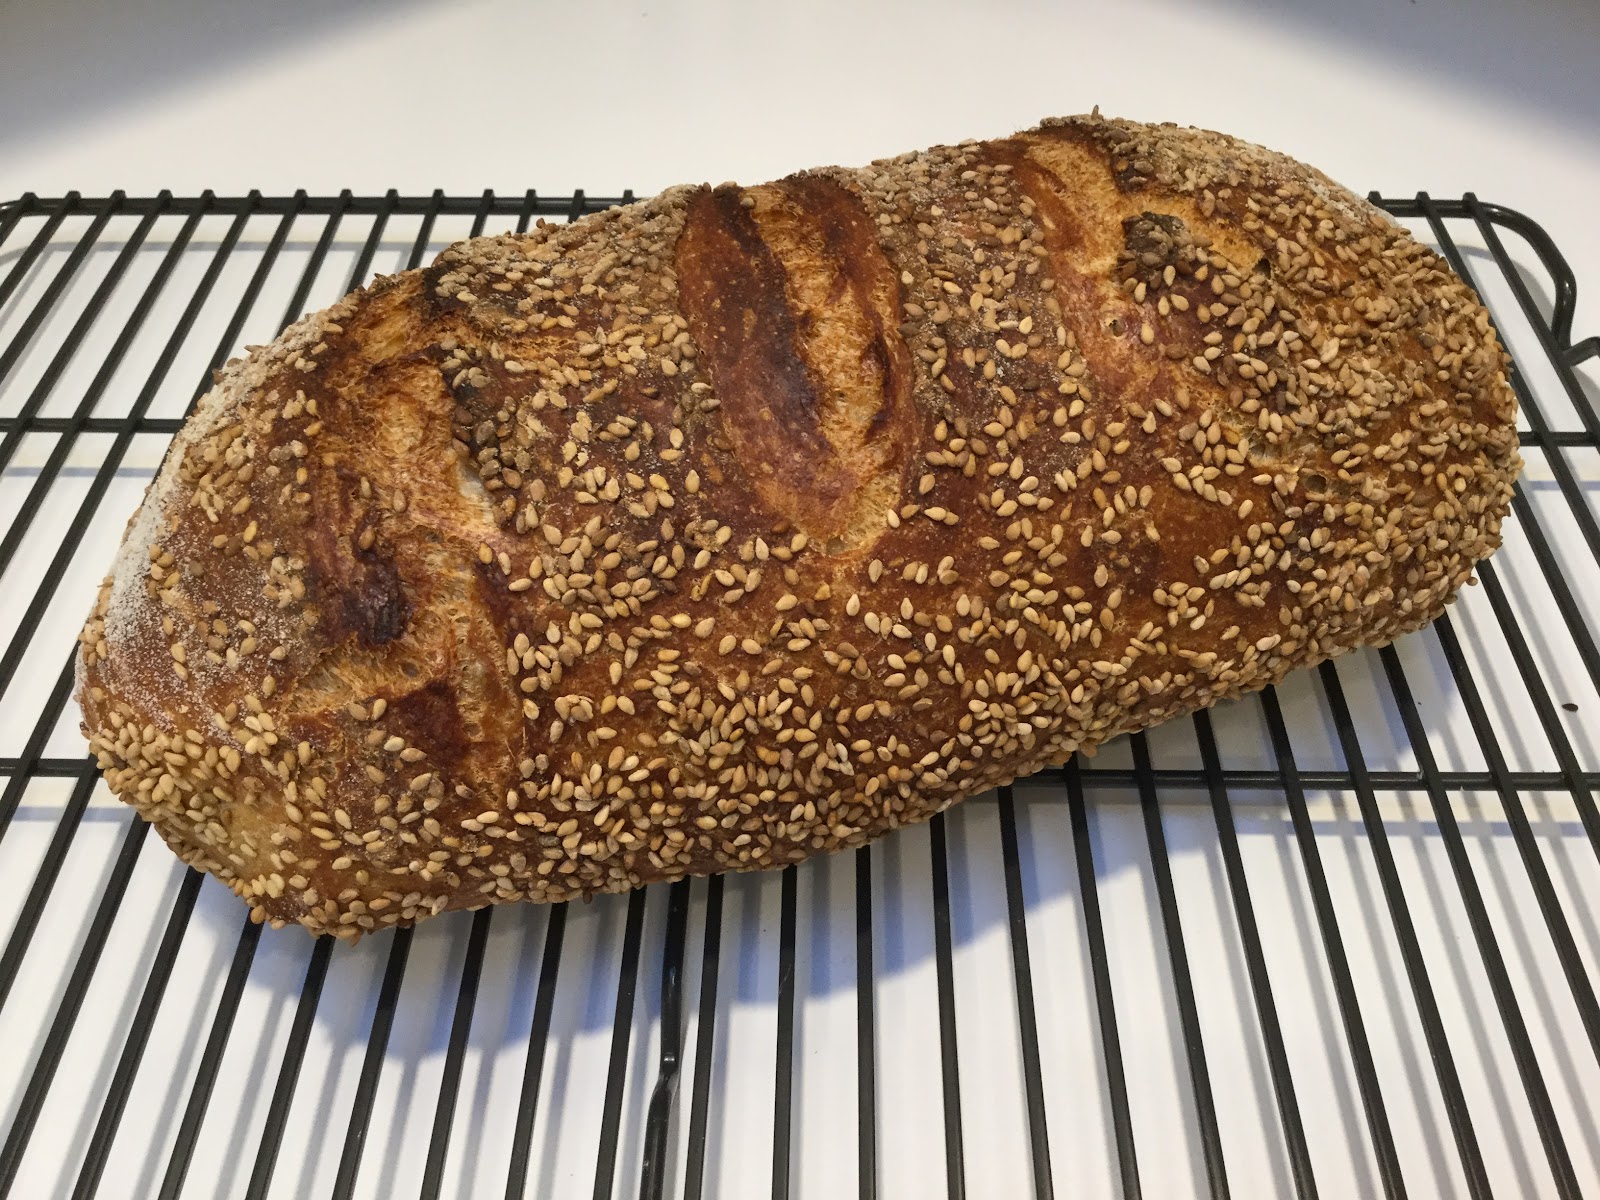 Tartine Light Rye - baked in a covered cast iron dutch oven